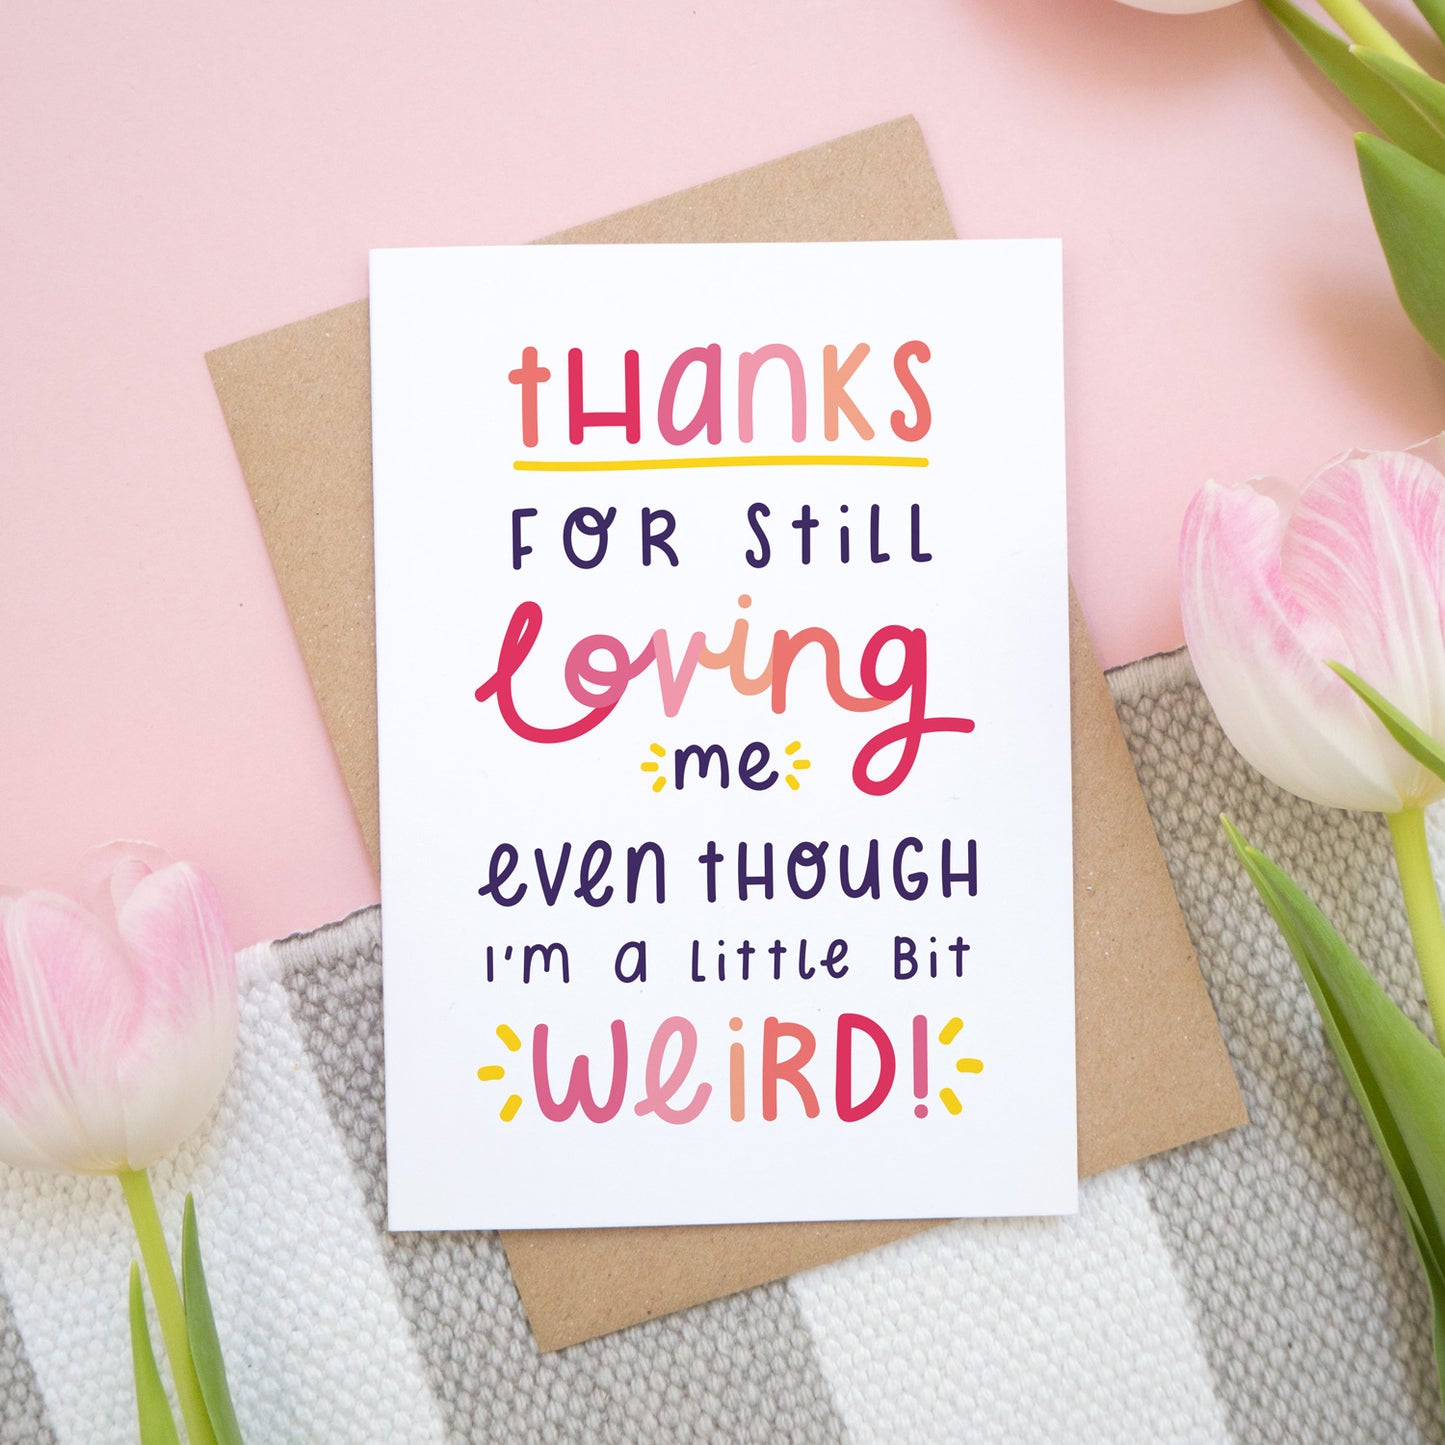 Thanks for still loving me even though I'm a little bit weird card in pink show on a pink background with tulips.